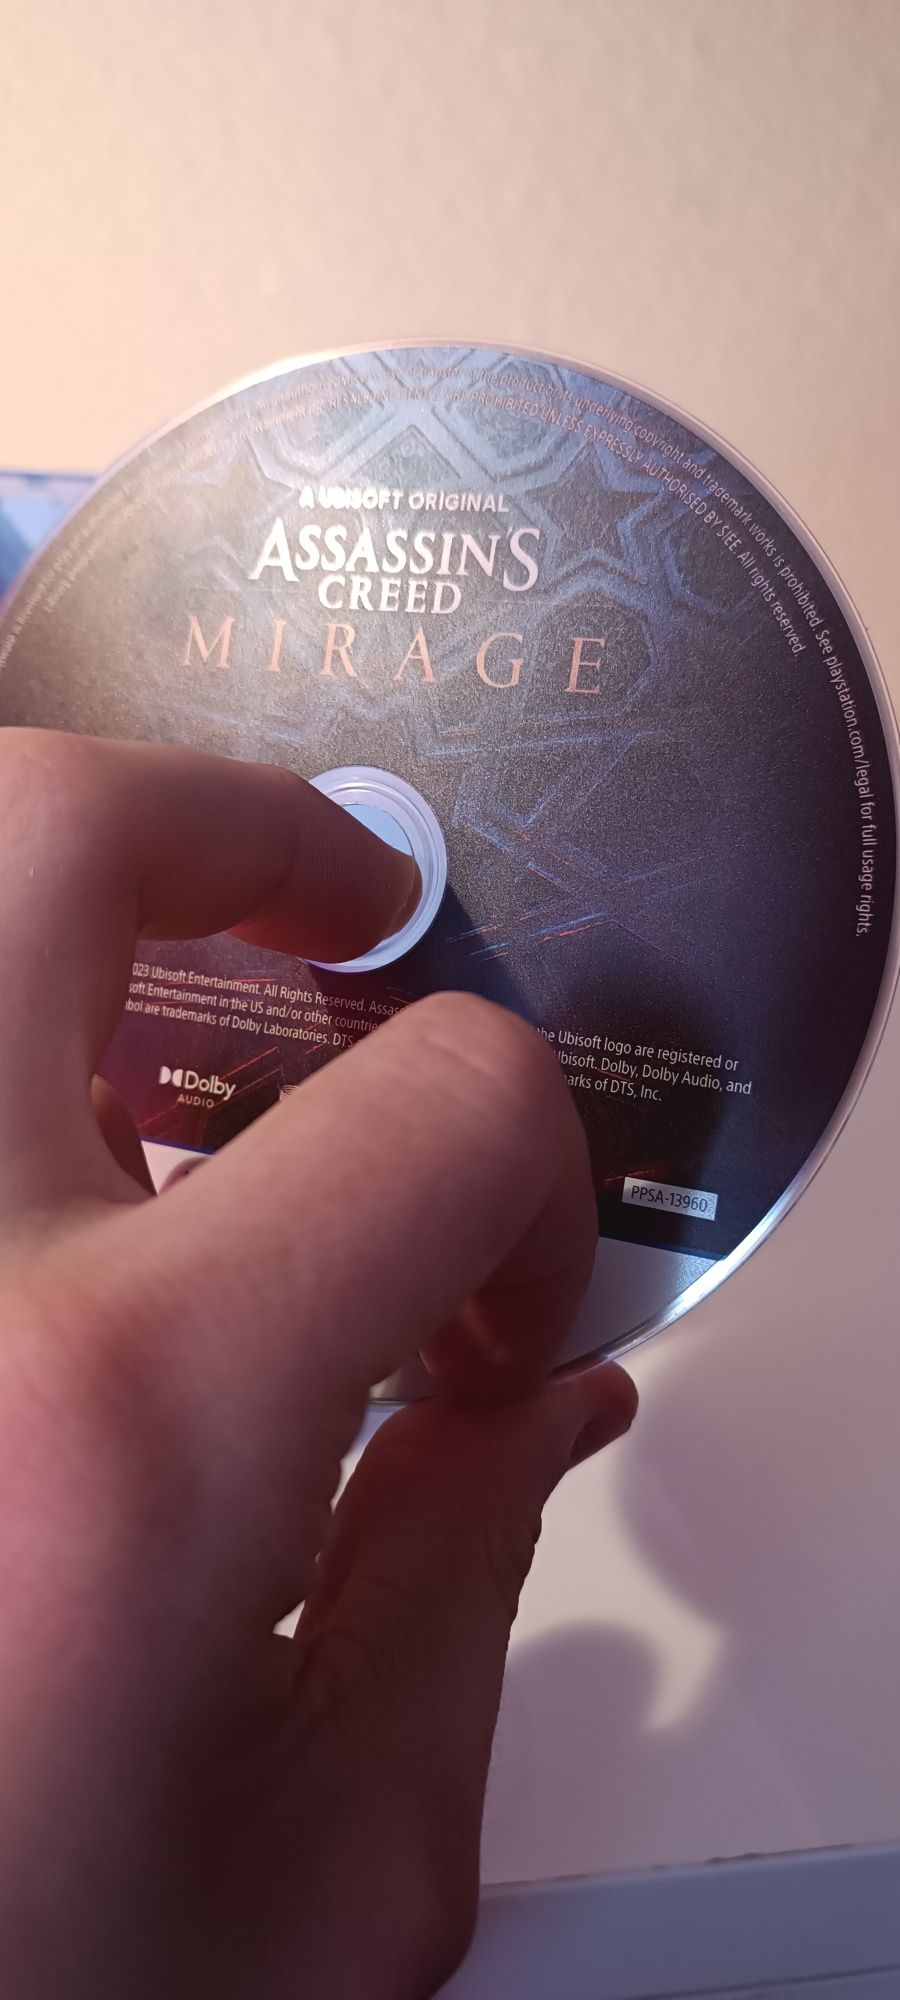 Disk Assassin's Creed Mirage for PS5